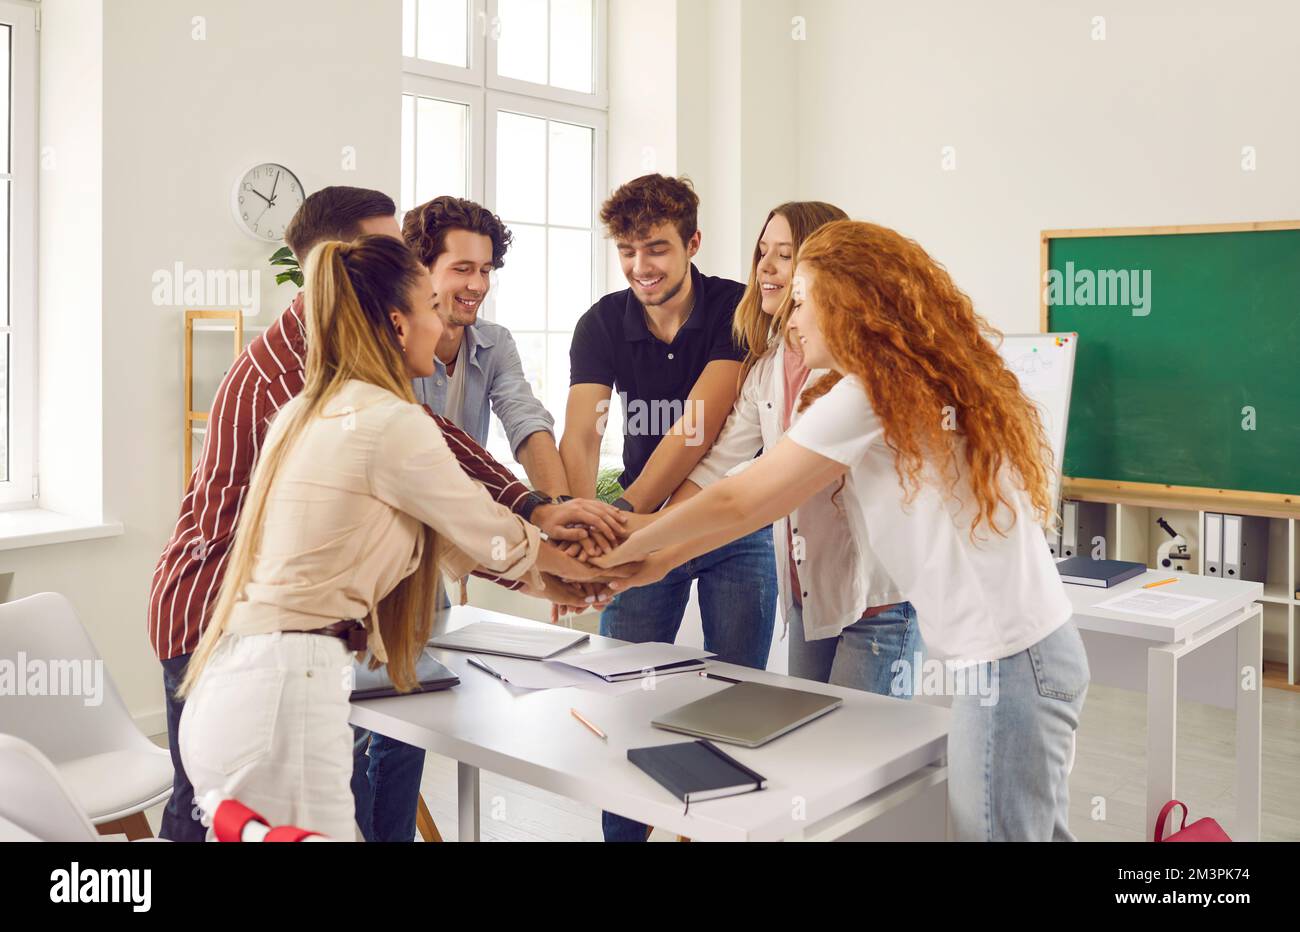 Classmate holds Hands Together, Partnership Teamwork and successful problem solving in college. Stock Photo